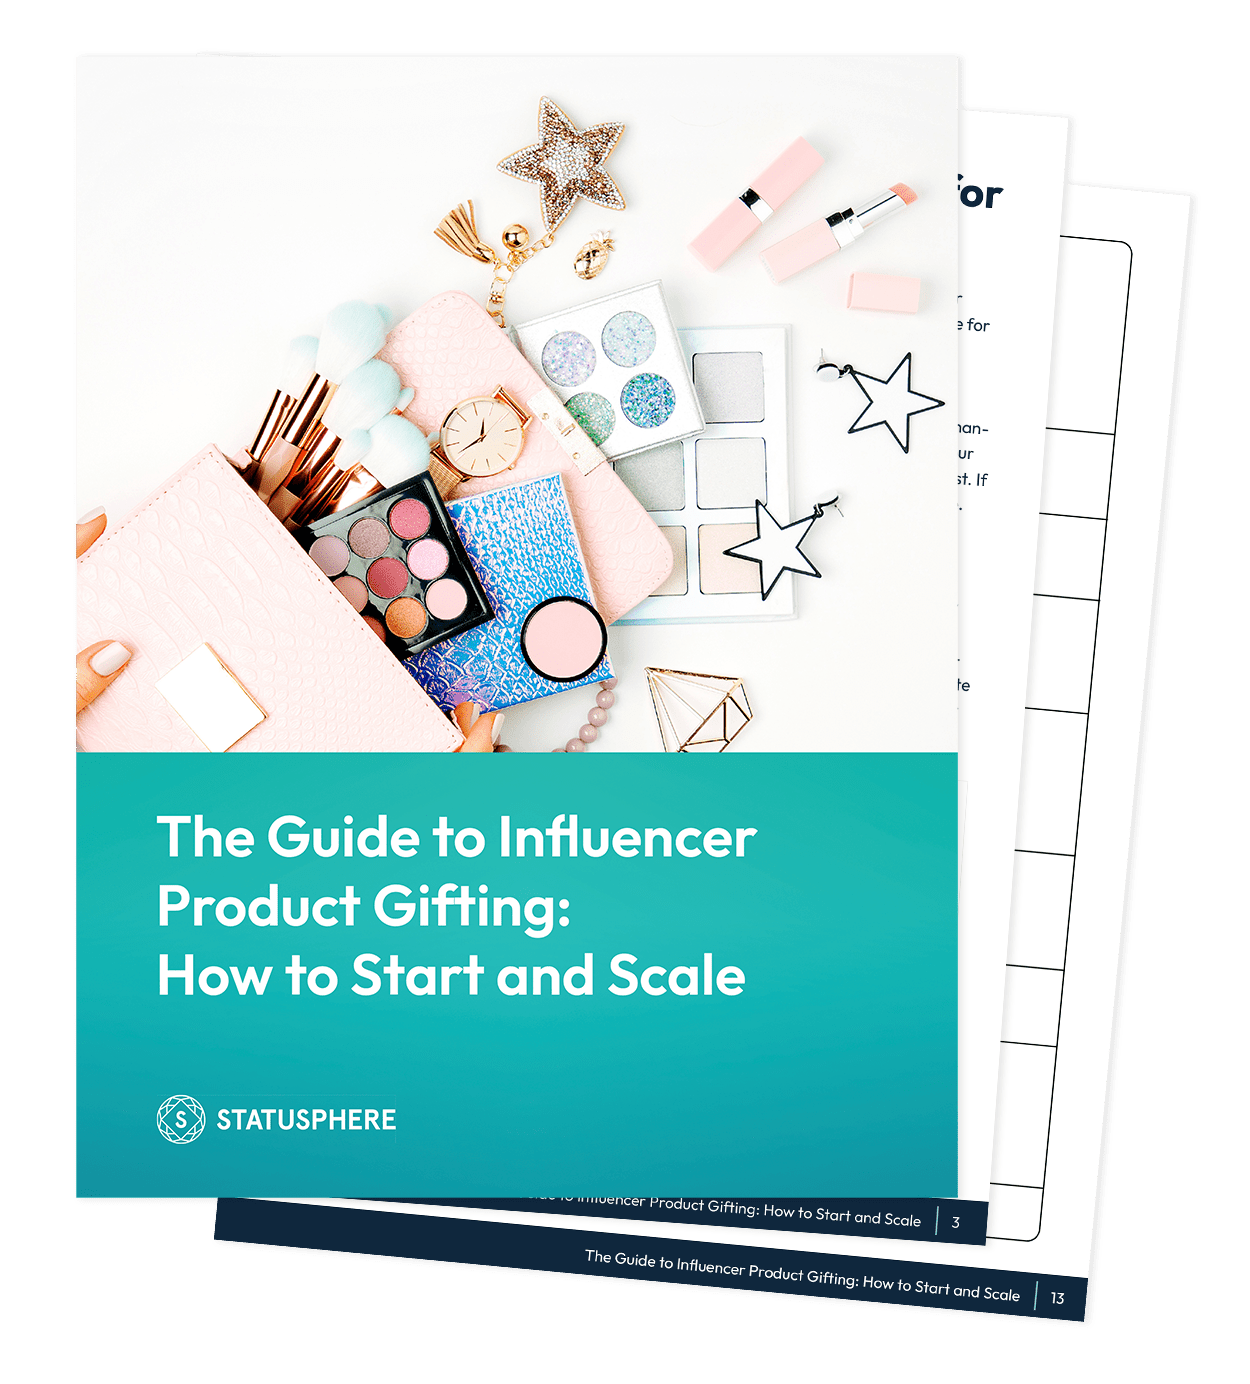 The Guide to Influencer Product Gifting: How to Start and Scale